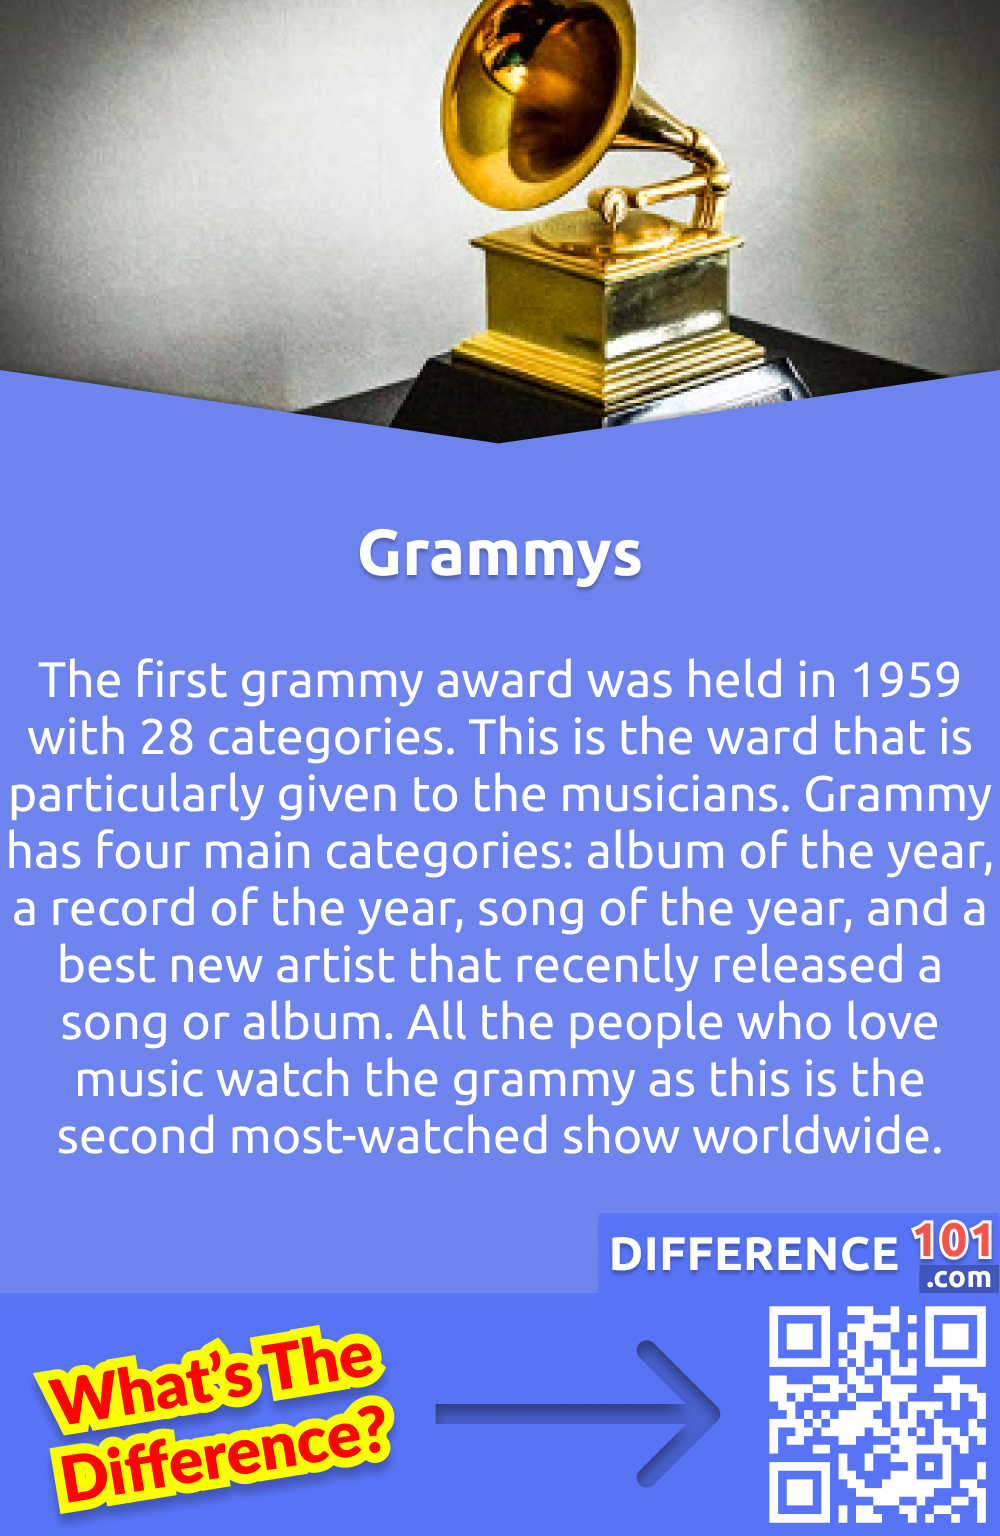 What Are Grammys? The first grammy award was held in 1959 with 28 categories. This is the ward that is particularly given to the musicians. Grammy has four main categories: album of the year, a record of the year, song of the year, and a best new artist that recently released a song or album. All the people who love music watch the grammy as this is the second most-watched show worldwide. 